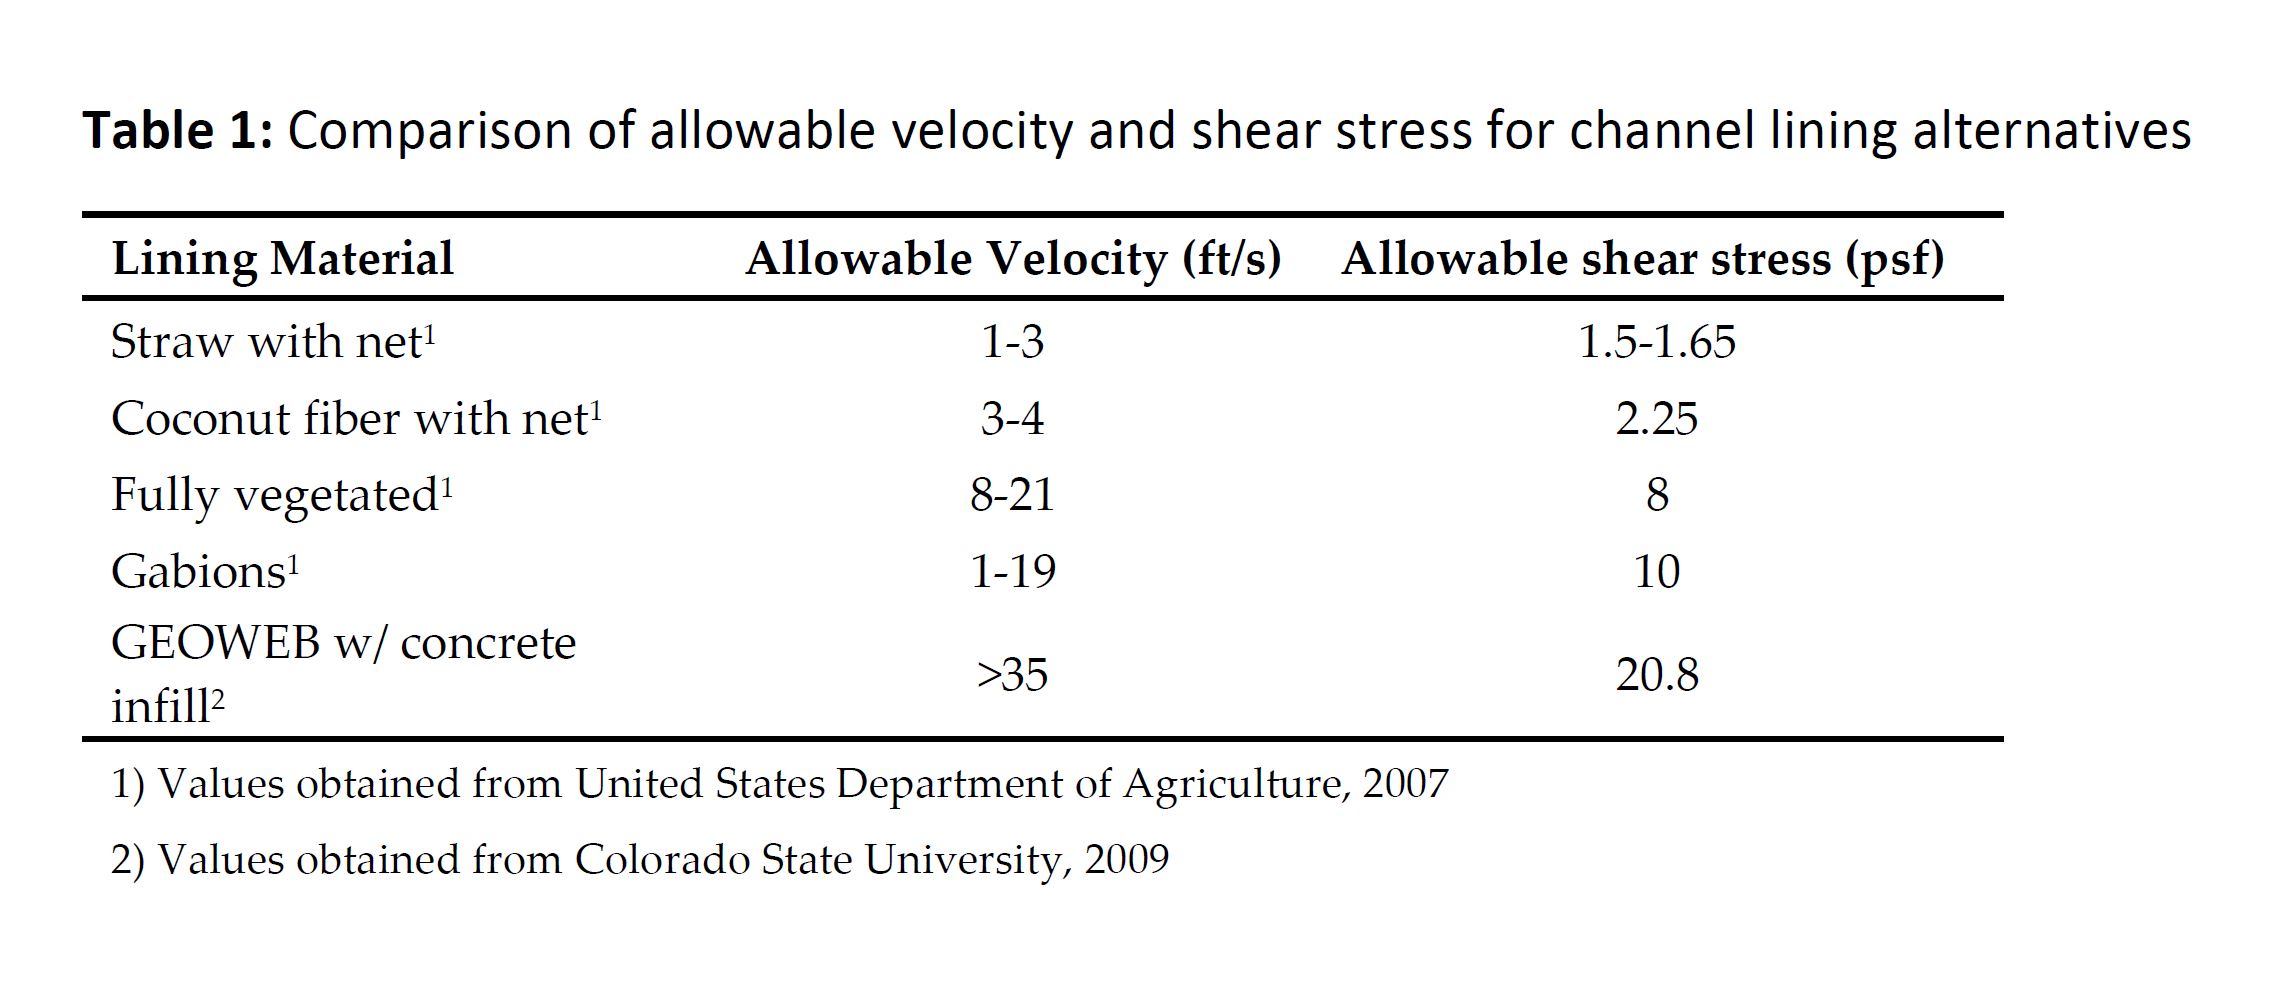  Comparison of allowable velocity and shear stress for channel lining alternatives